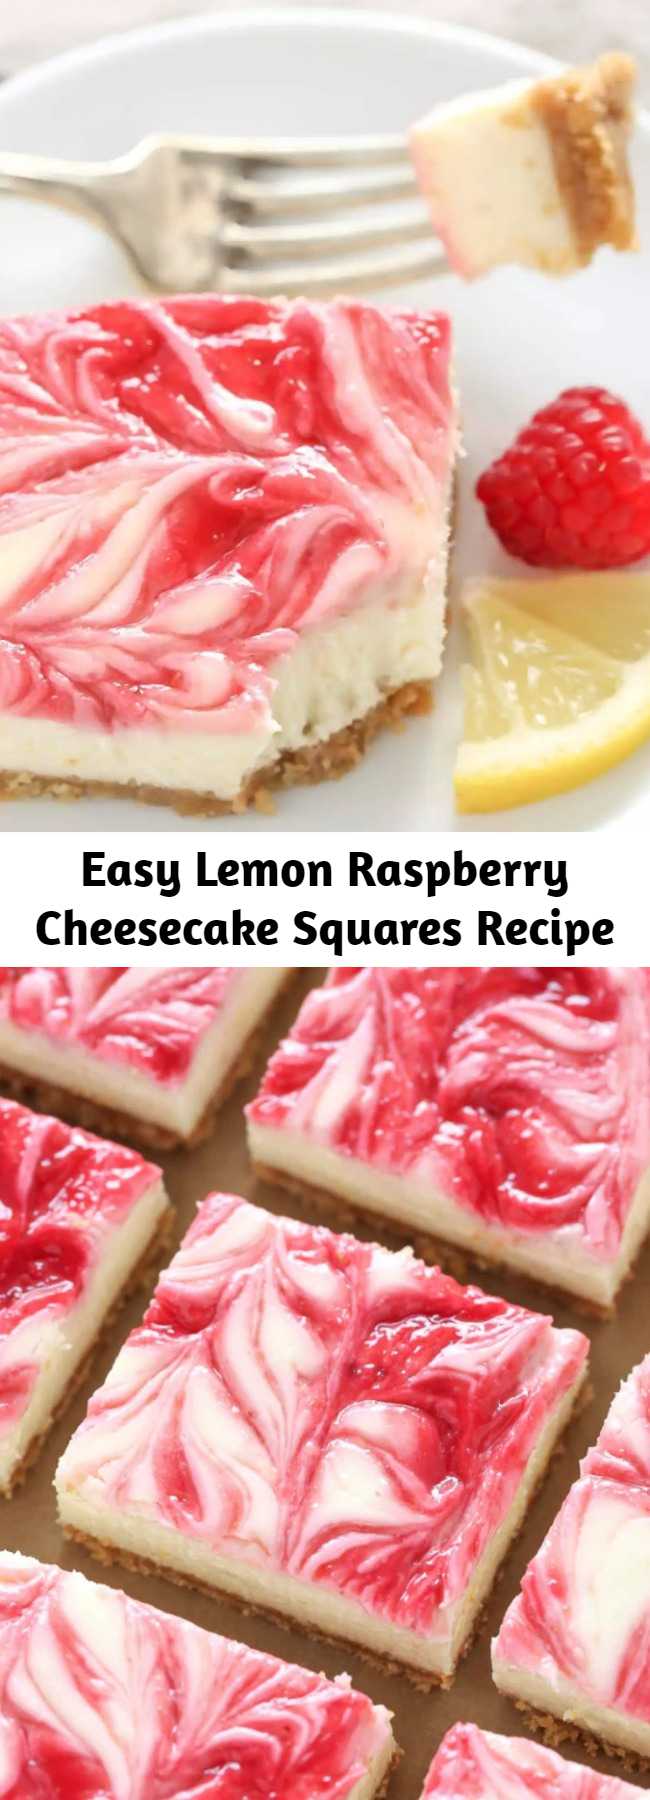 Easy Lemon Raspberry Cheesecake Squares Recipe - These Lemon Raspberry Cheesecake Squares feature a creamy lemon cheesecake filling with a raspberry swirl topped on a homemade graham cracker crust.